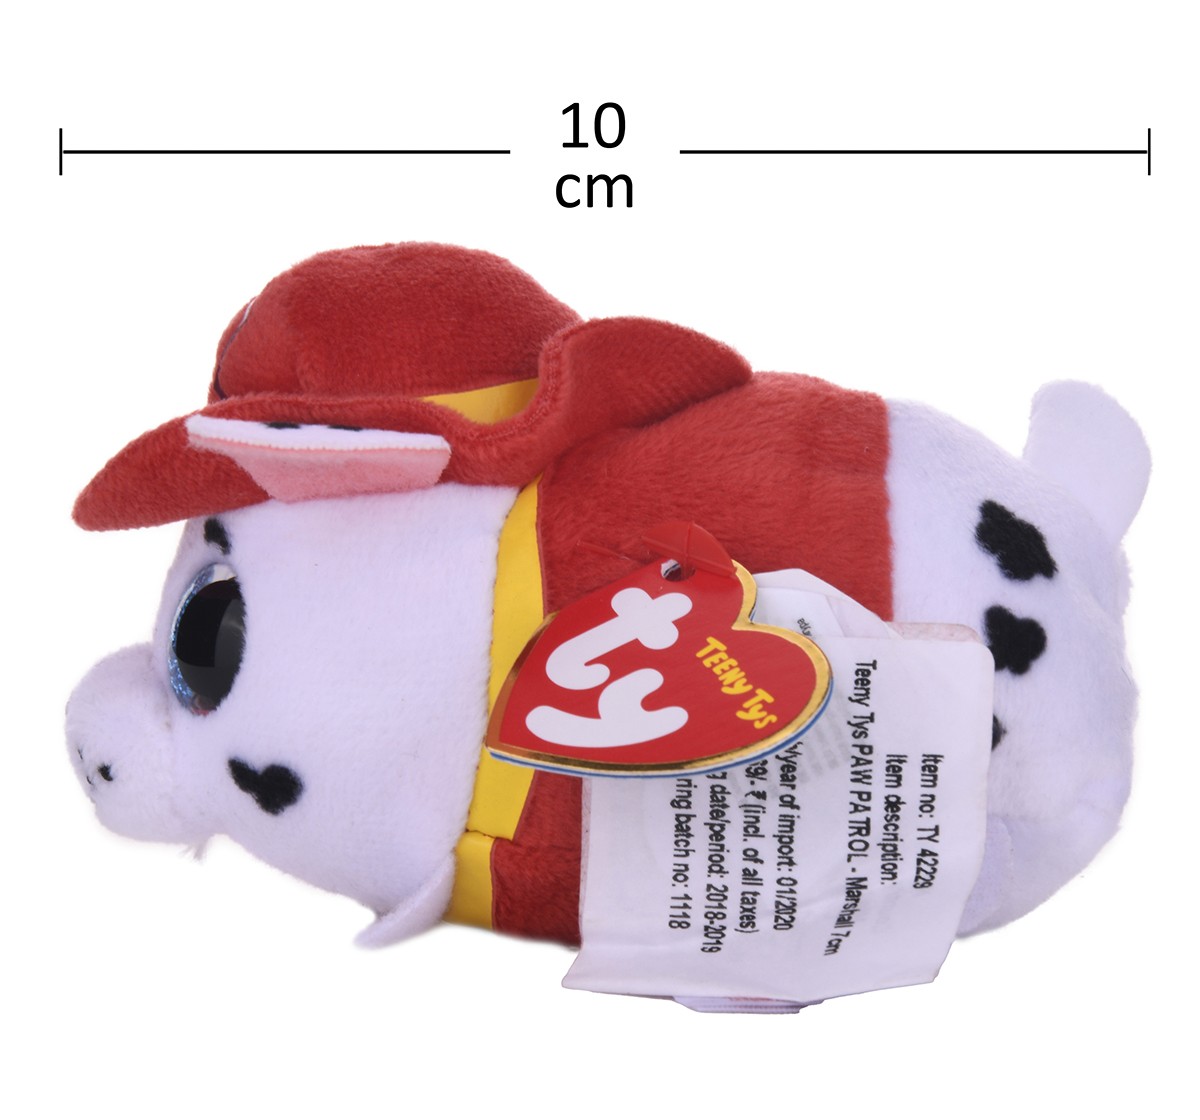  Ty Teeny Tys Paw Petrol Marshall Quirky Soft Toys for Kids age 3Y+ - 10 Cm 